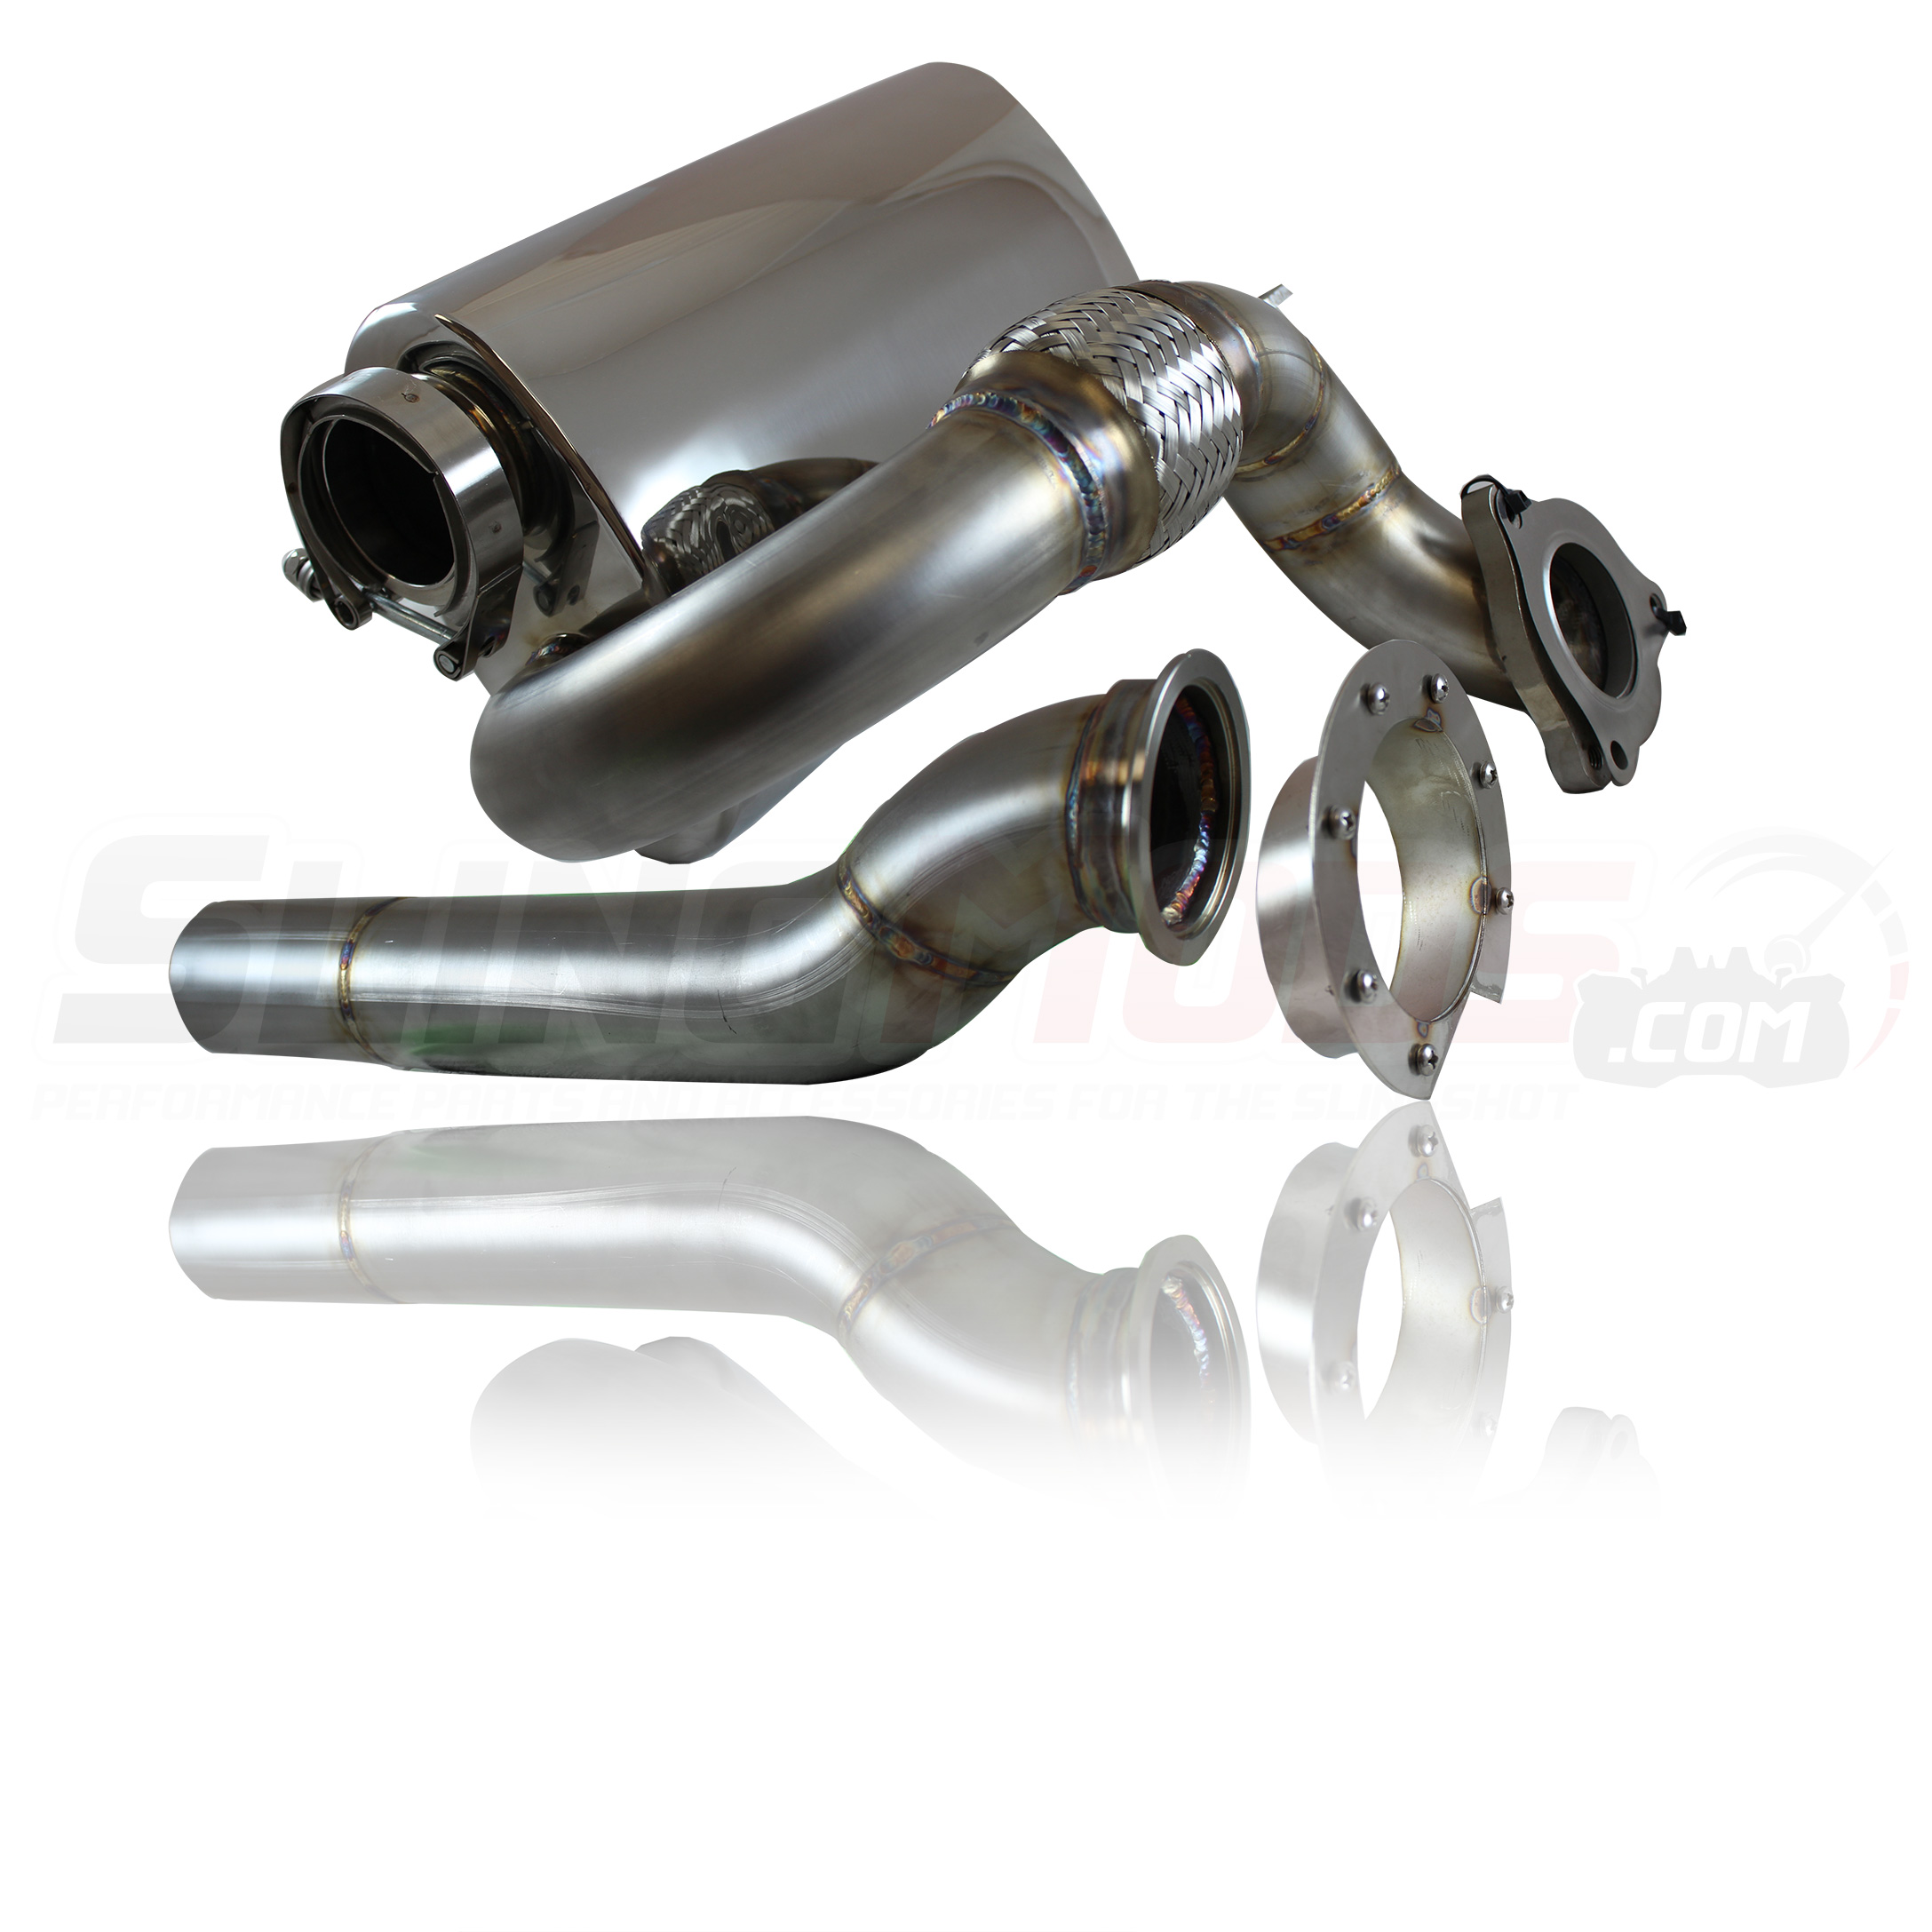 Polaris Slingshot Side Exit Exhaust by Alpha Powersport